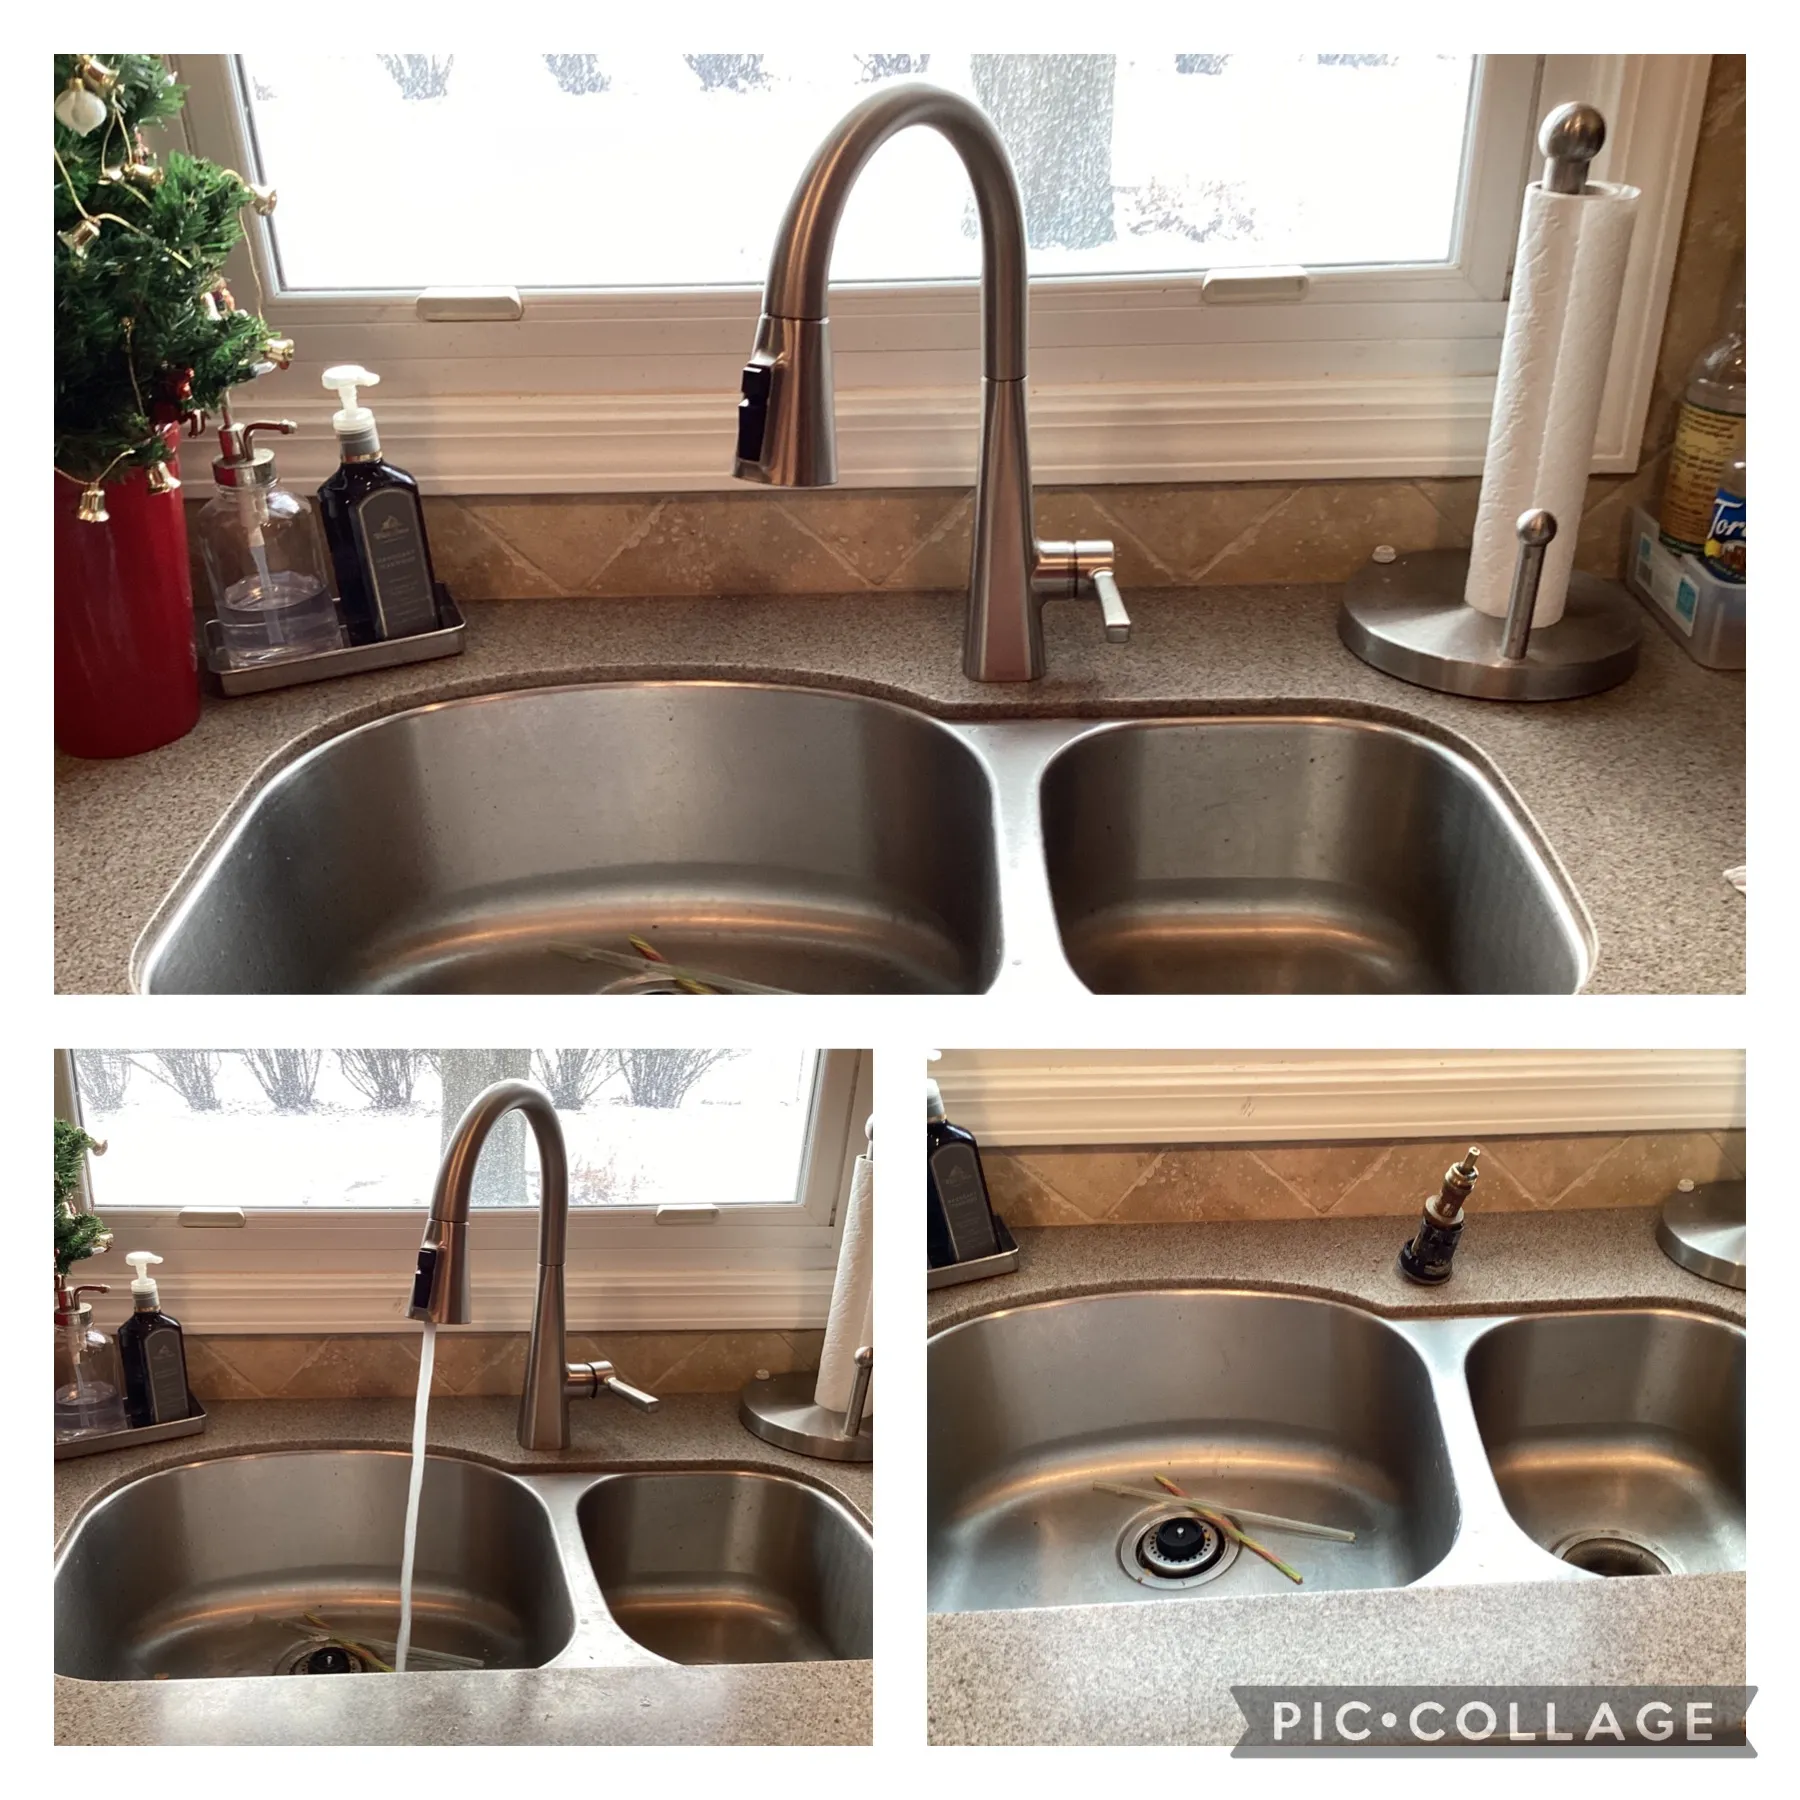 Kitchen faucet replacement service performed in Wheaton home by Mr. Handyman.